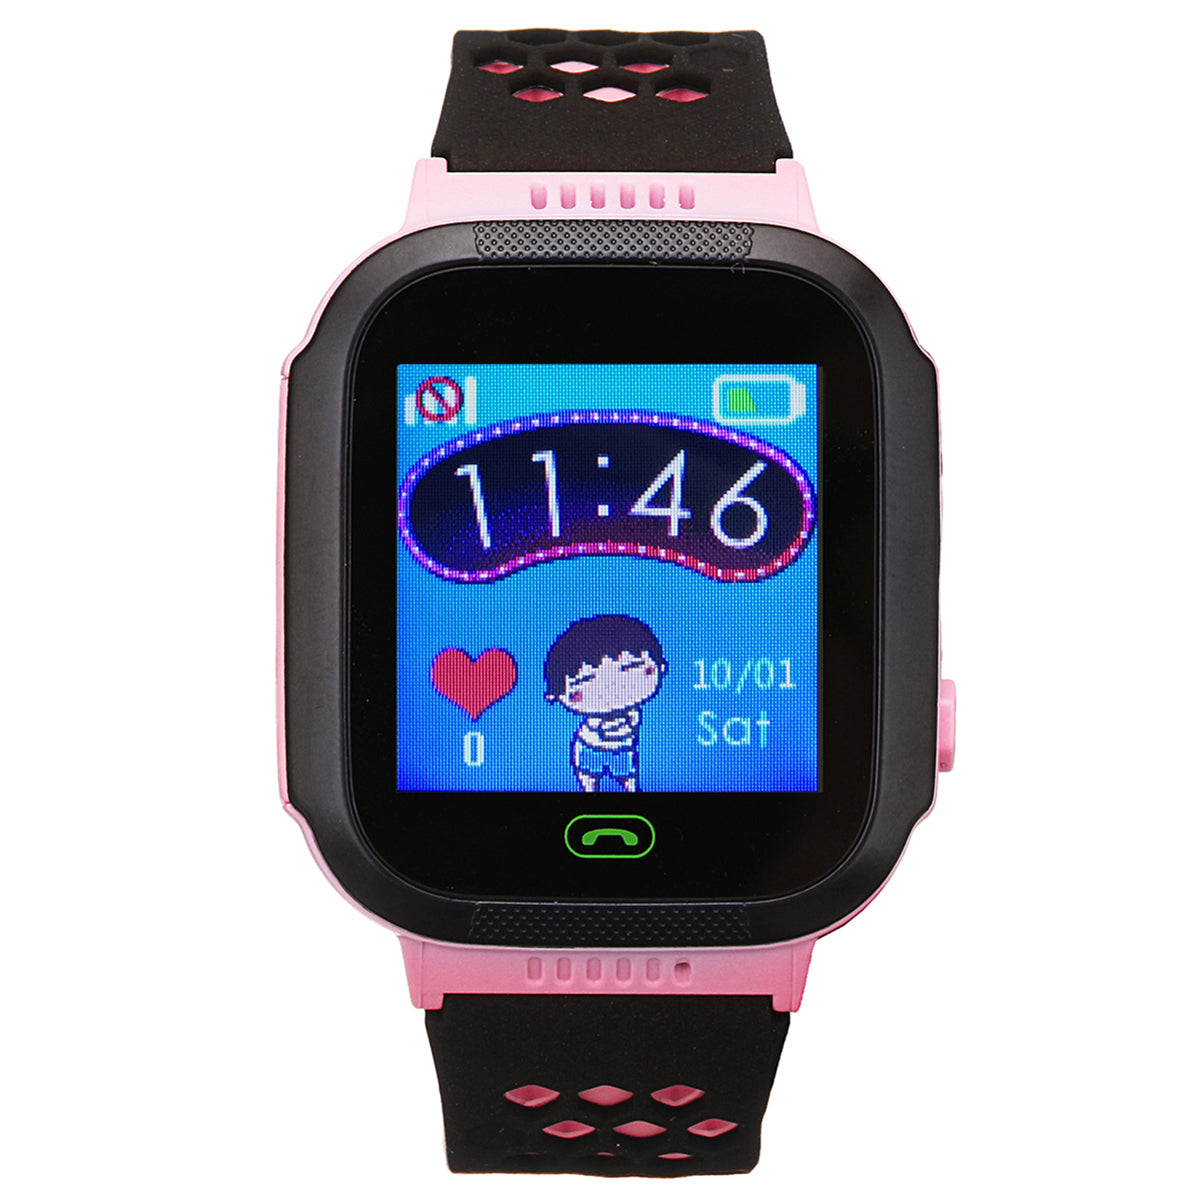 Bakeey Waterproof Tracker SOS Call Children Smart Watch For Android IOS